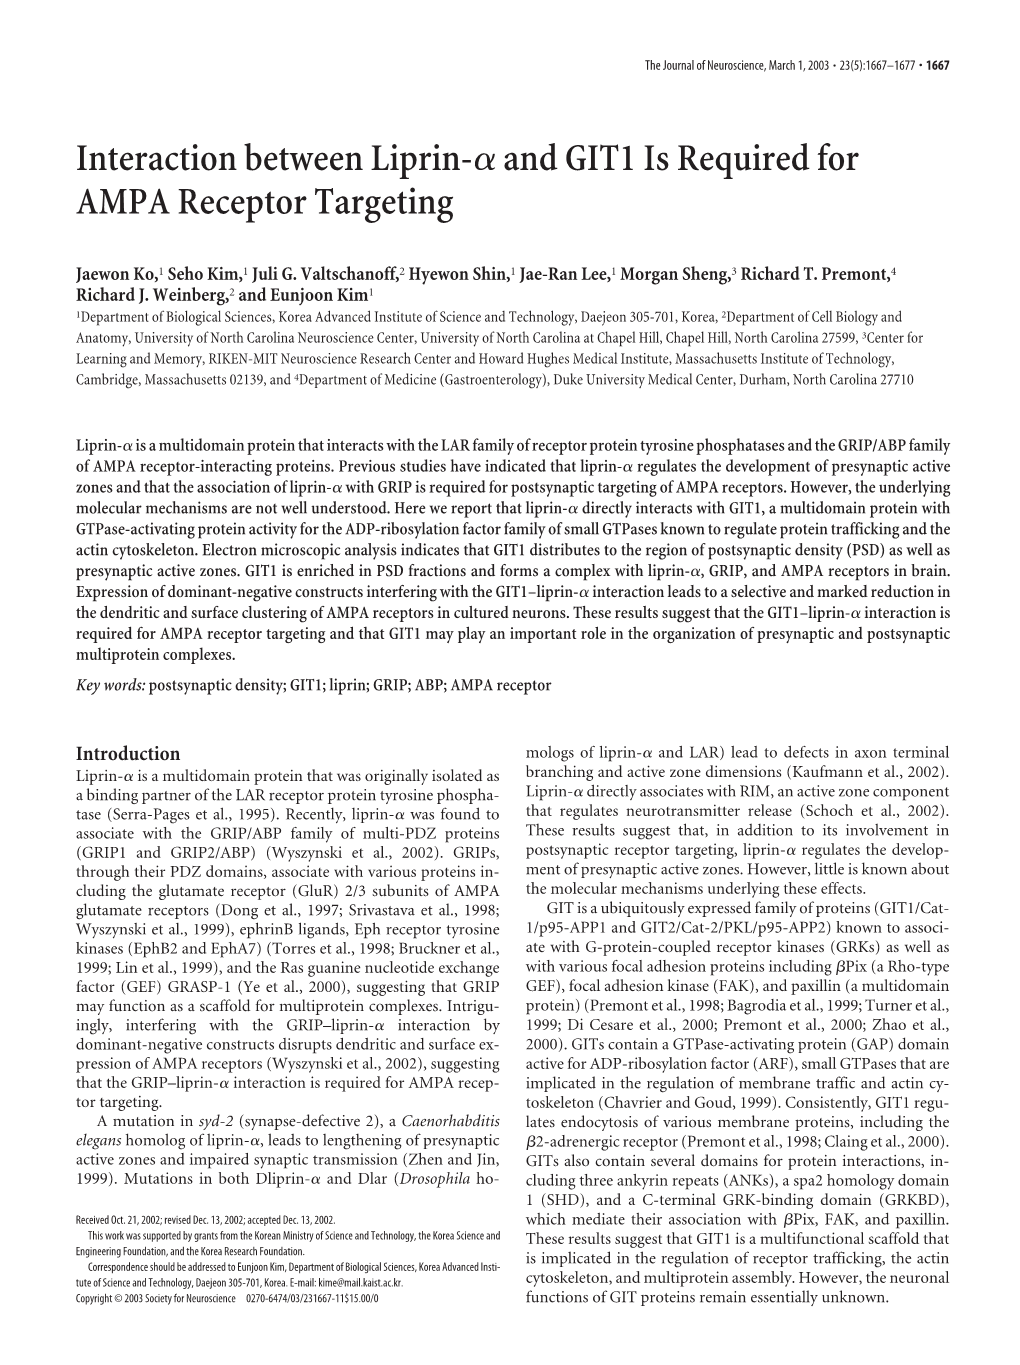 Interaction Between Liprin-Αand GIT1 Is Required for AMPA Receptor